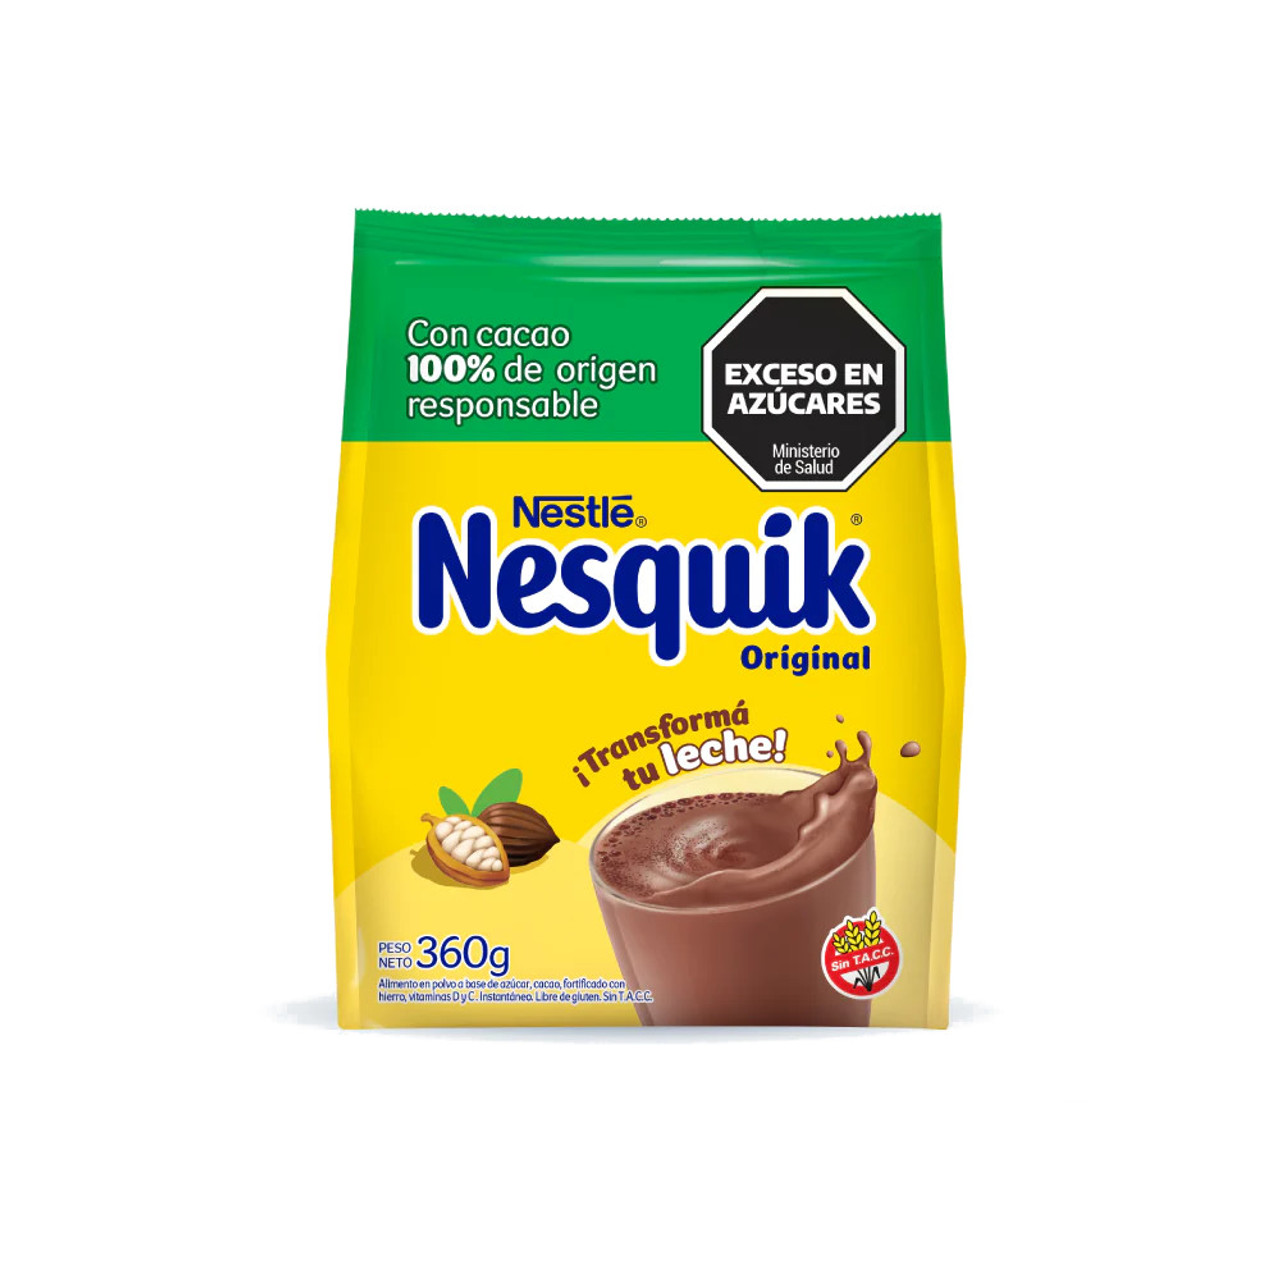 Compare prices for NESQUICK across all European  stores